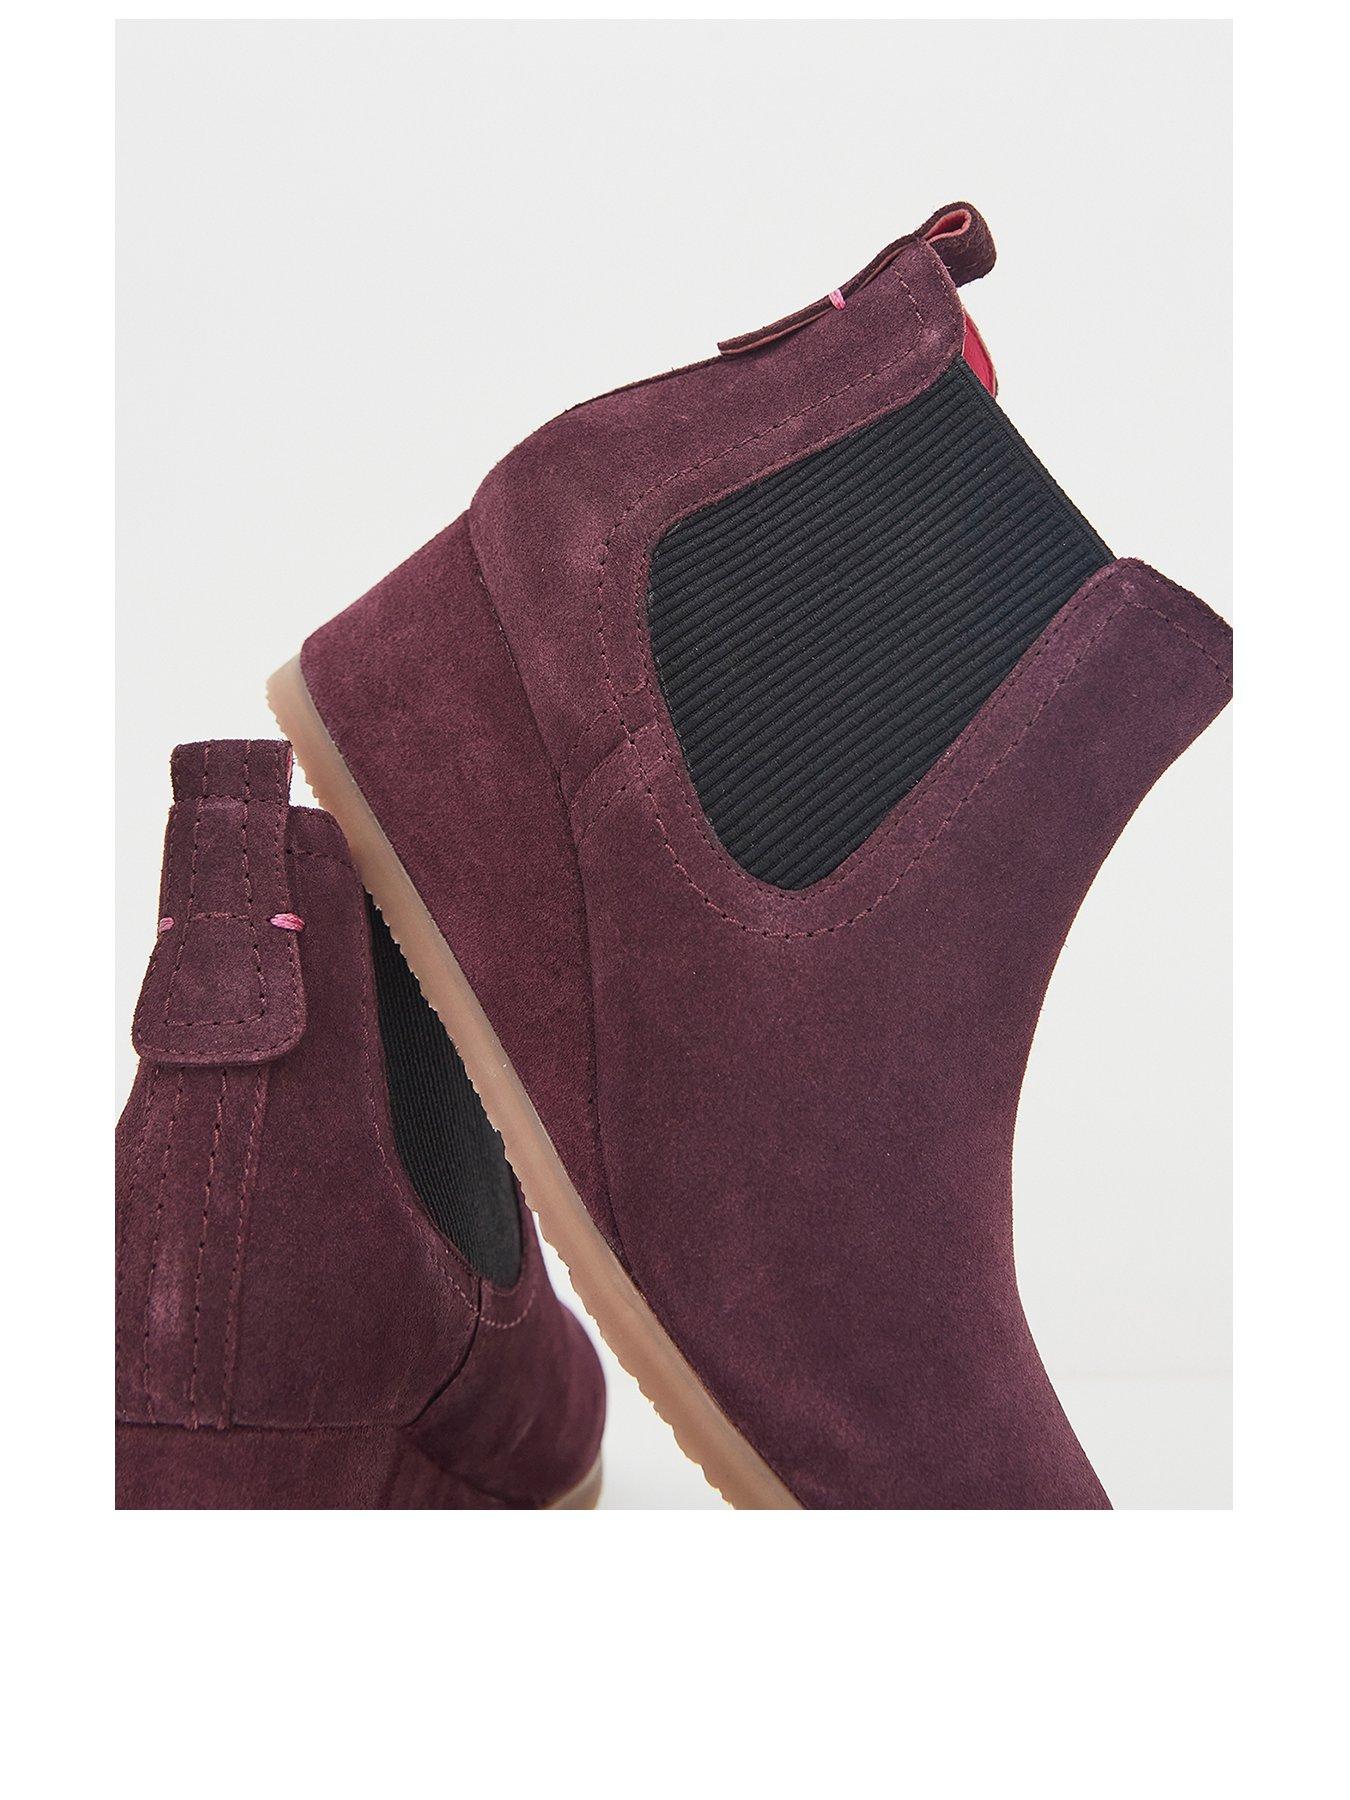 Shoes & boots Issy Suede Wedge Boot - Plum